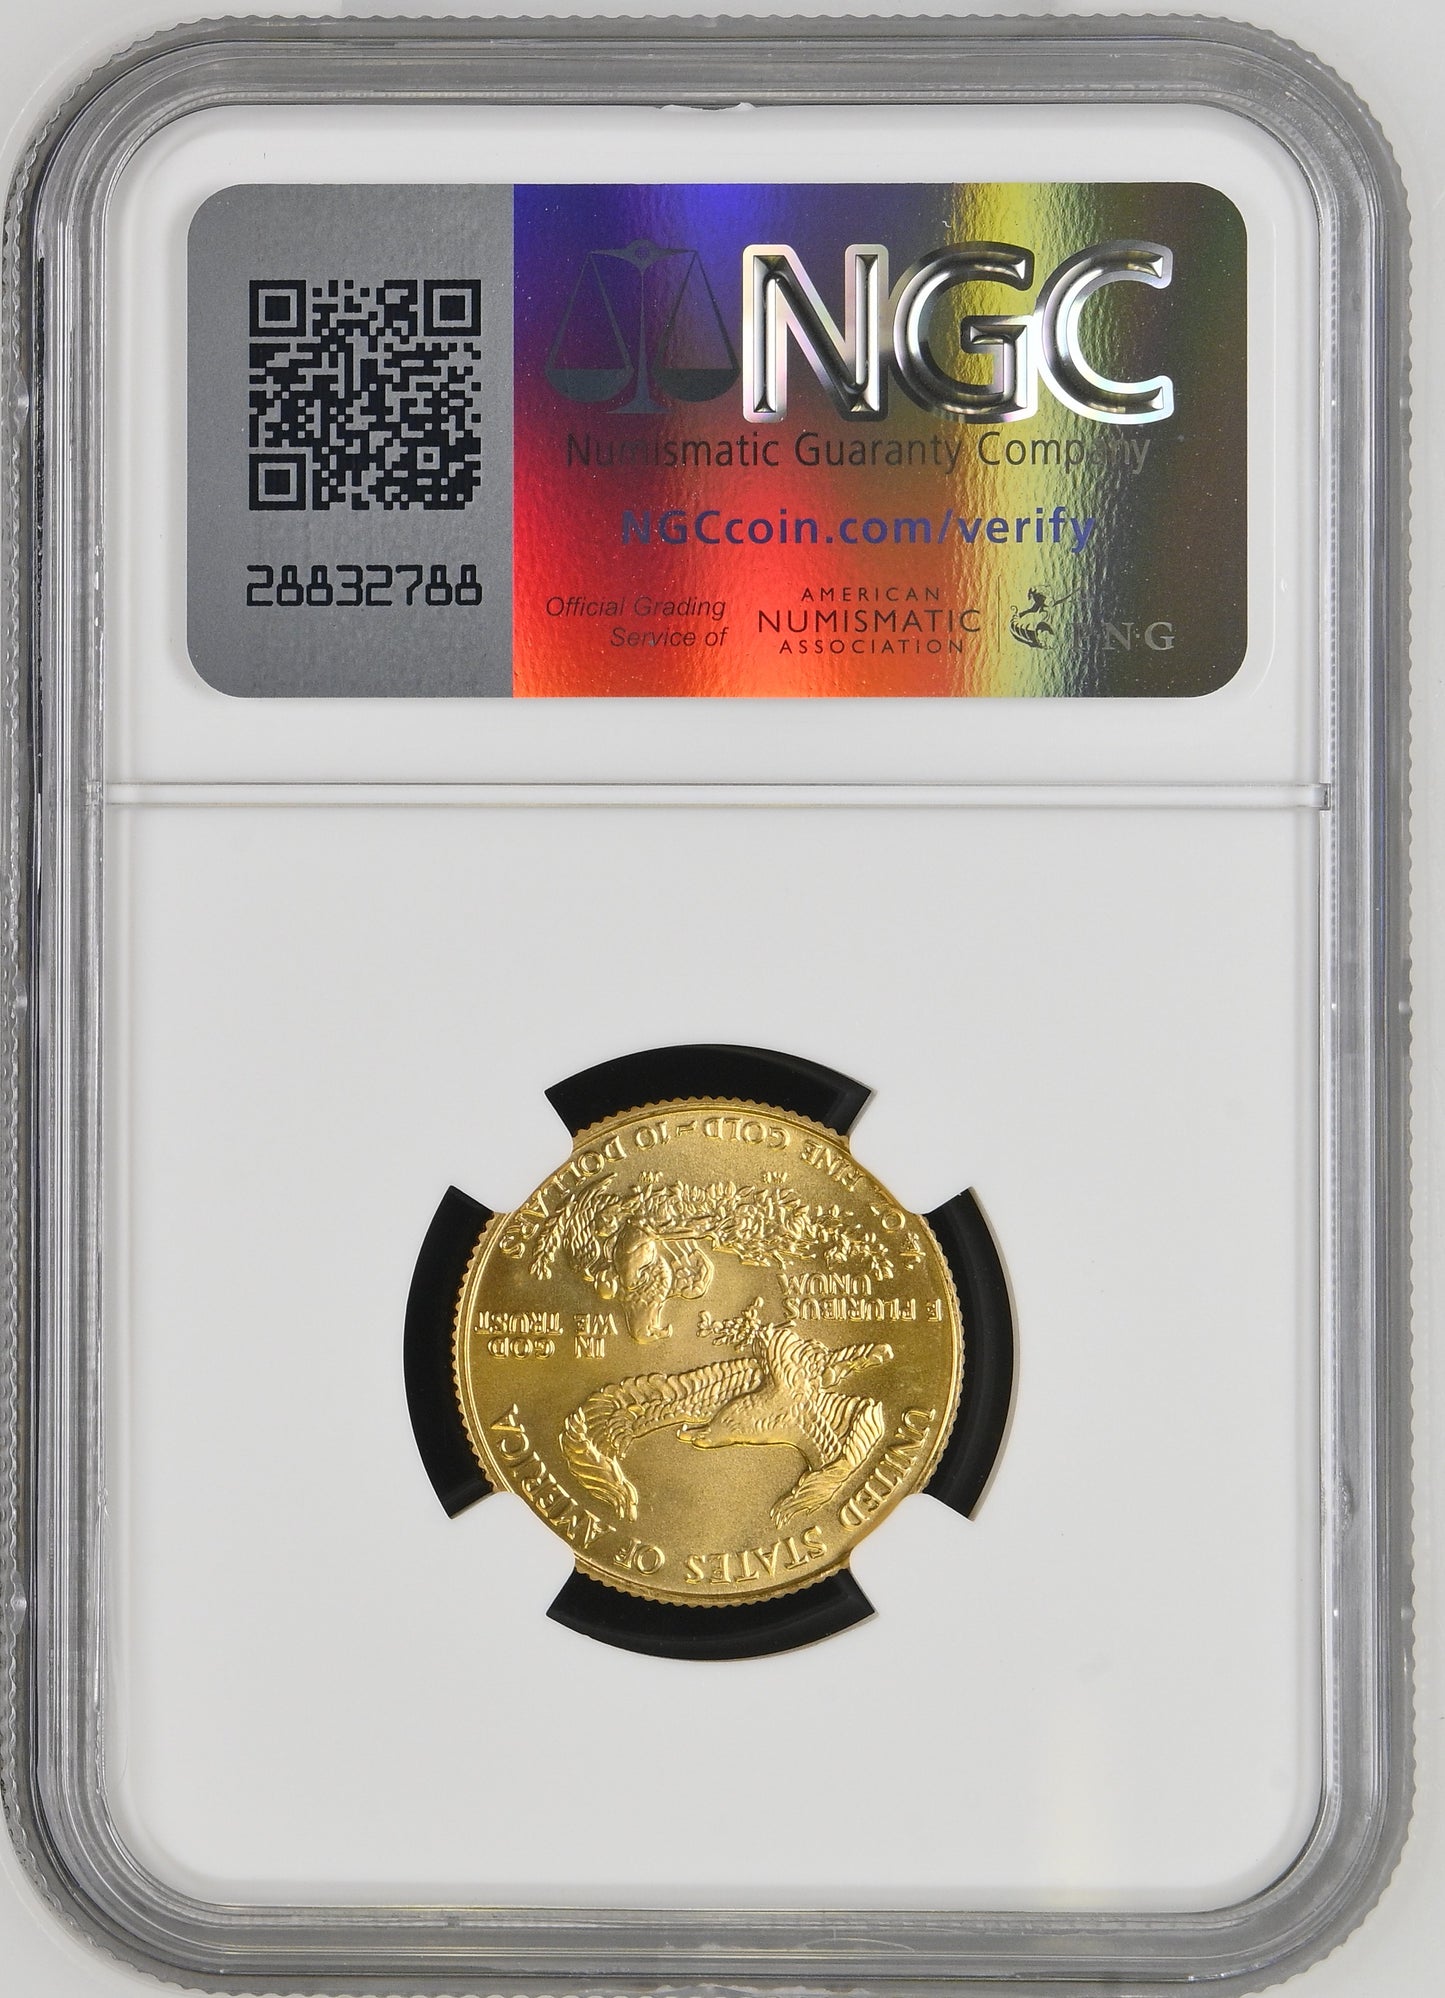 1986 1/4 oz Gold American Eagle 10$ Bullion Gold Coin - NGC MS 69